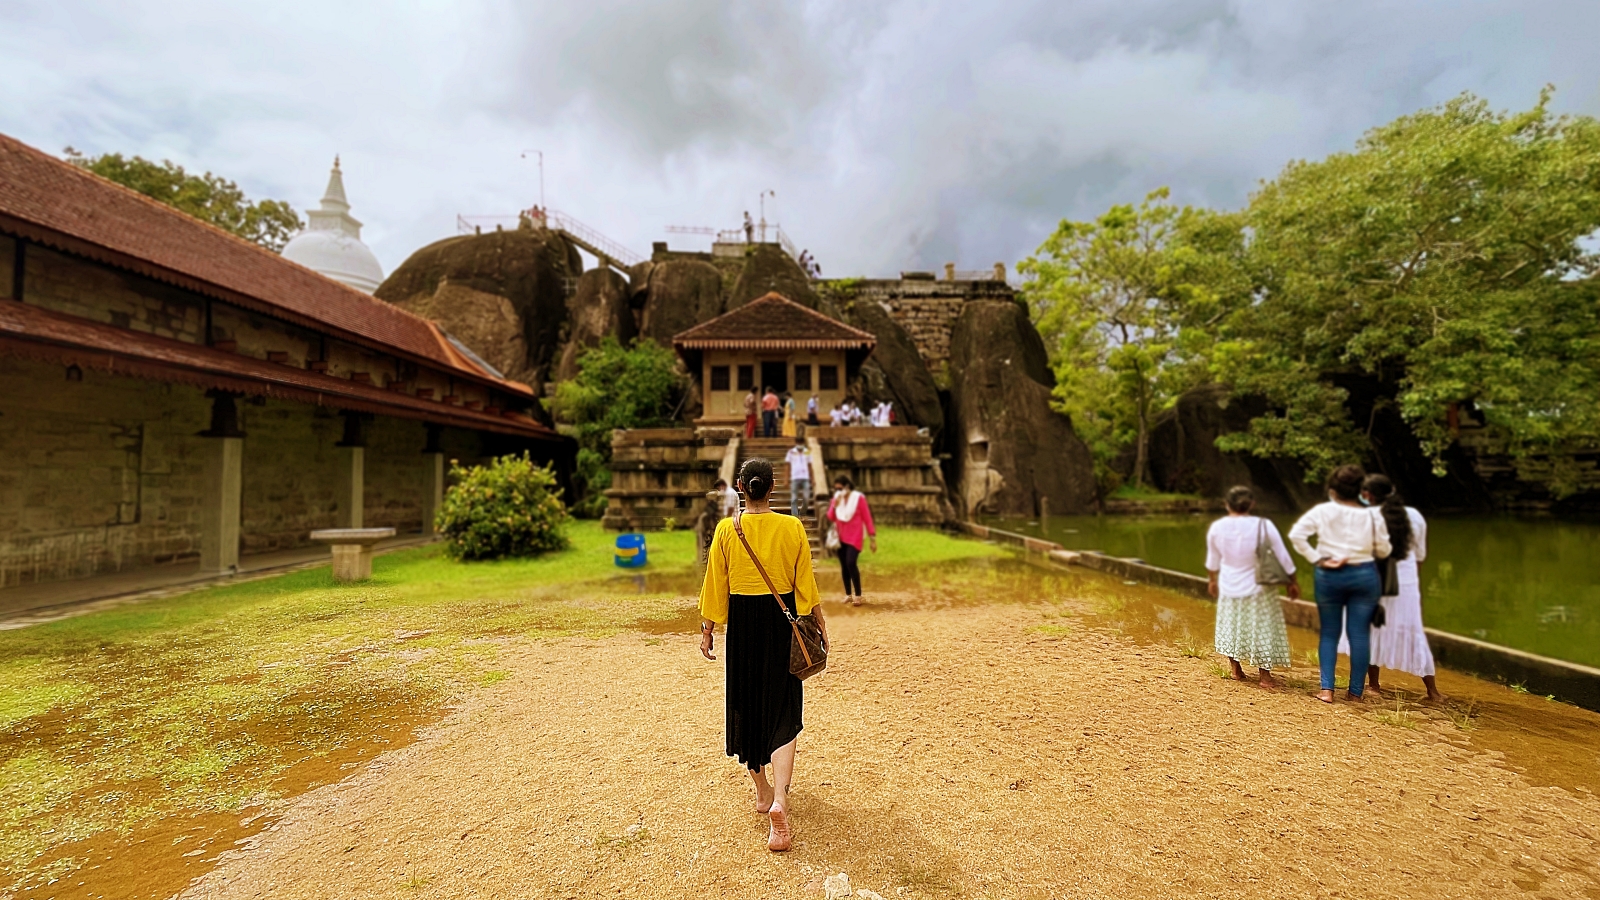 Sri Lanka Tourism Travel Influencer program October 2021: Anuradapura: 10 Ancient Sites you must see in your lifetime. 